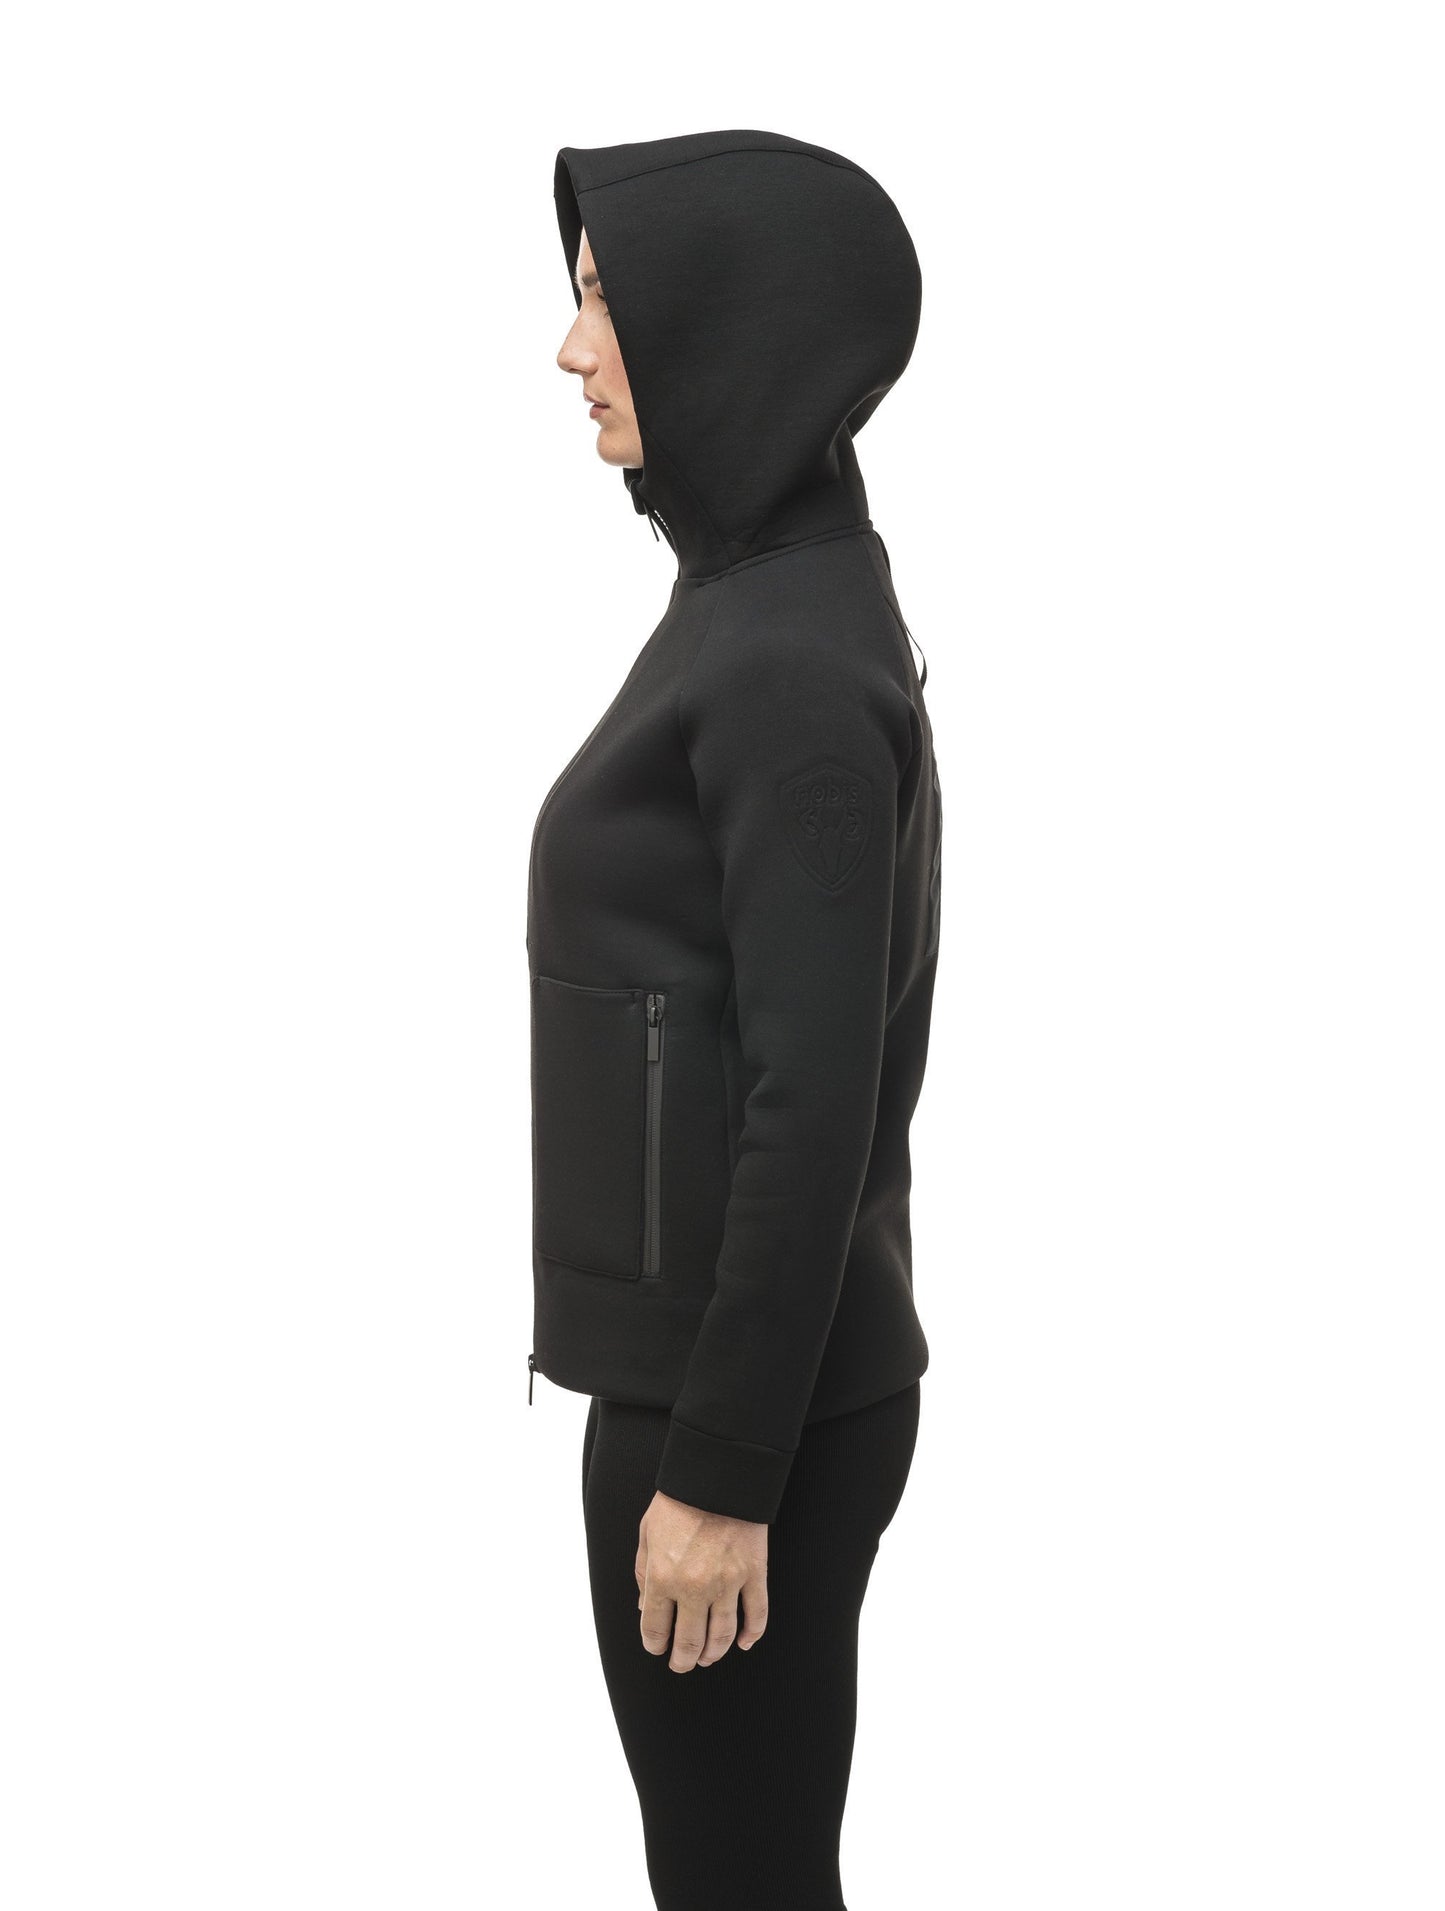 Structured women's hoodie with exposed zipper in Black